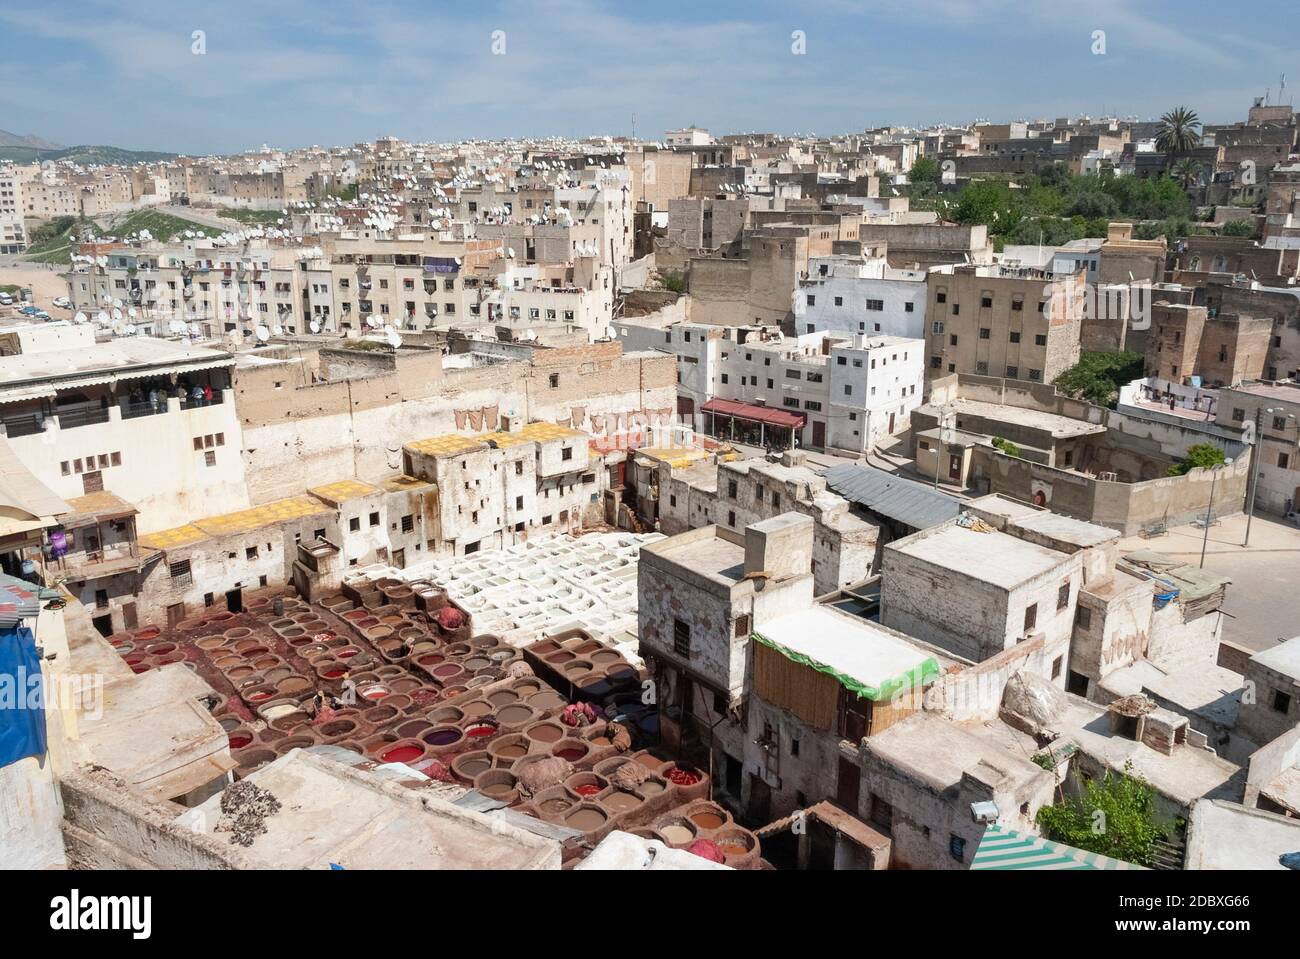 Aerial Panoramic View Of A Tannery And The Old Town Of Fes El Bali In Morocco Stock Photo